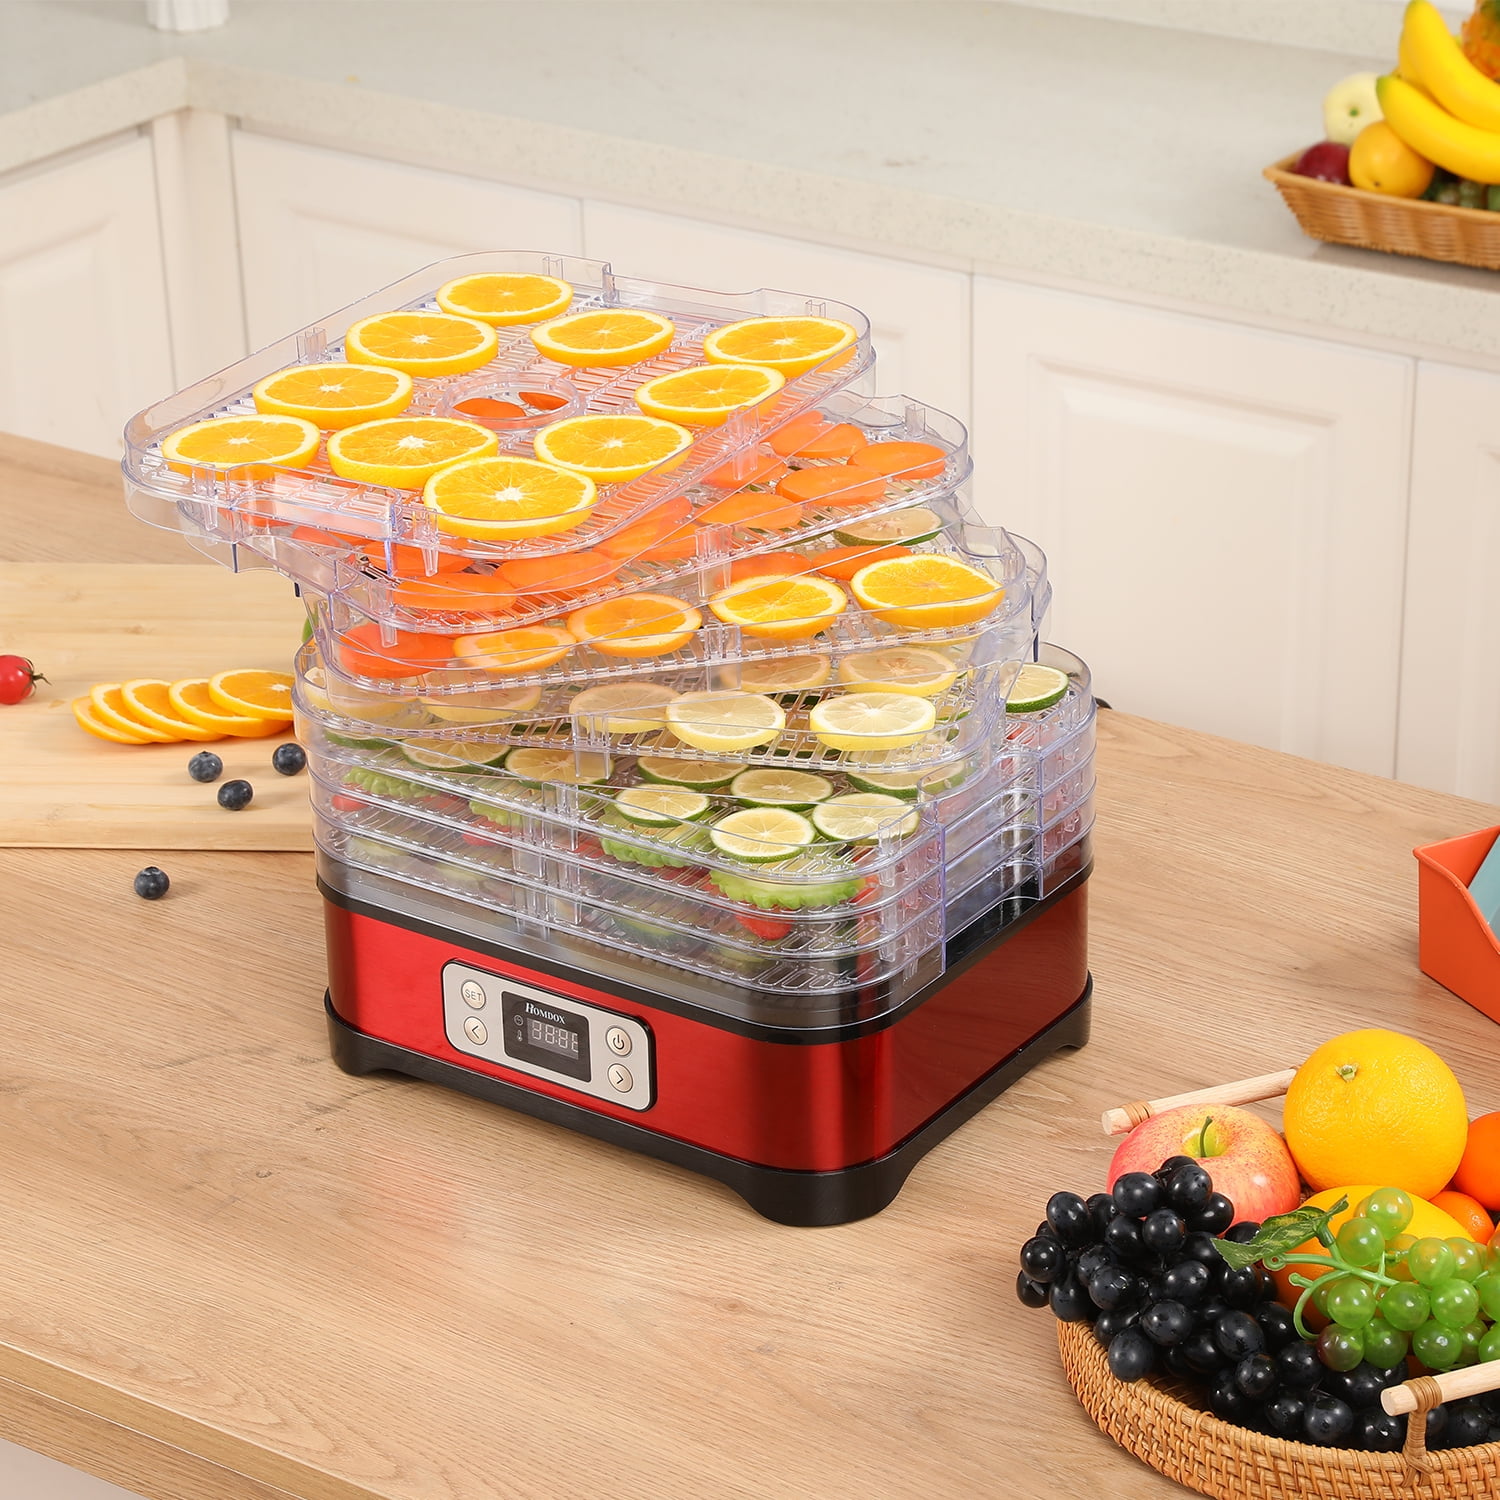 GMZ&KEHC Small Food Dehydrator Machine with 5 Dryer Trays, Electric Fruit  Vegetable Dryer for Snacks Fruit Veggies Herbs,High-Heat Circulation,White